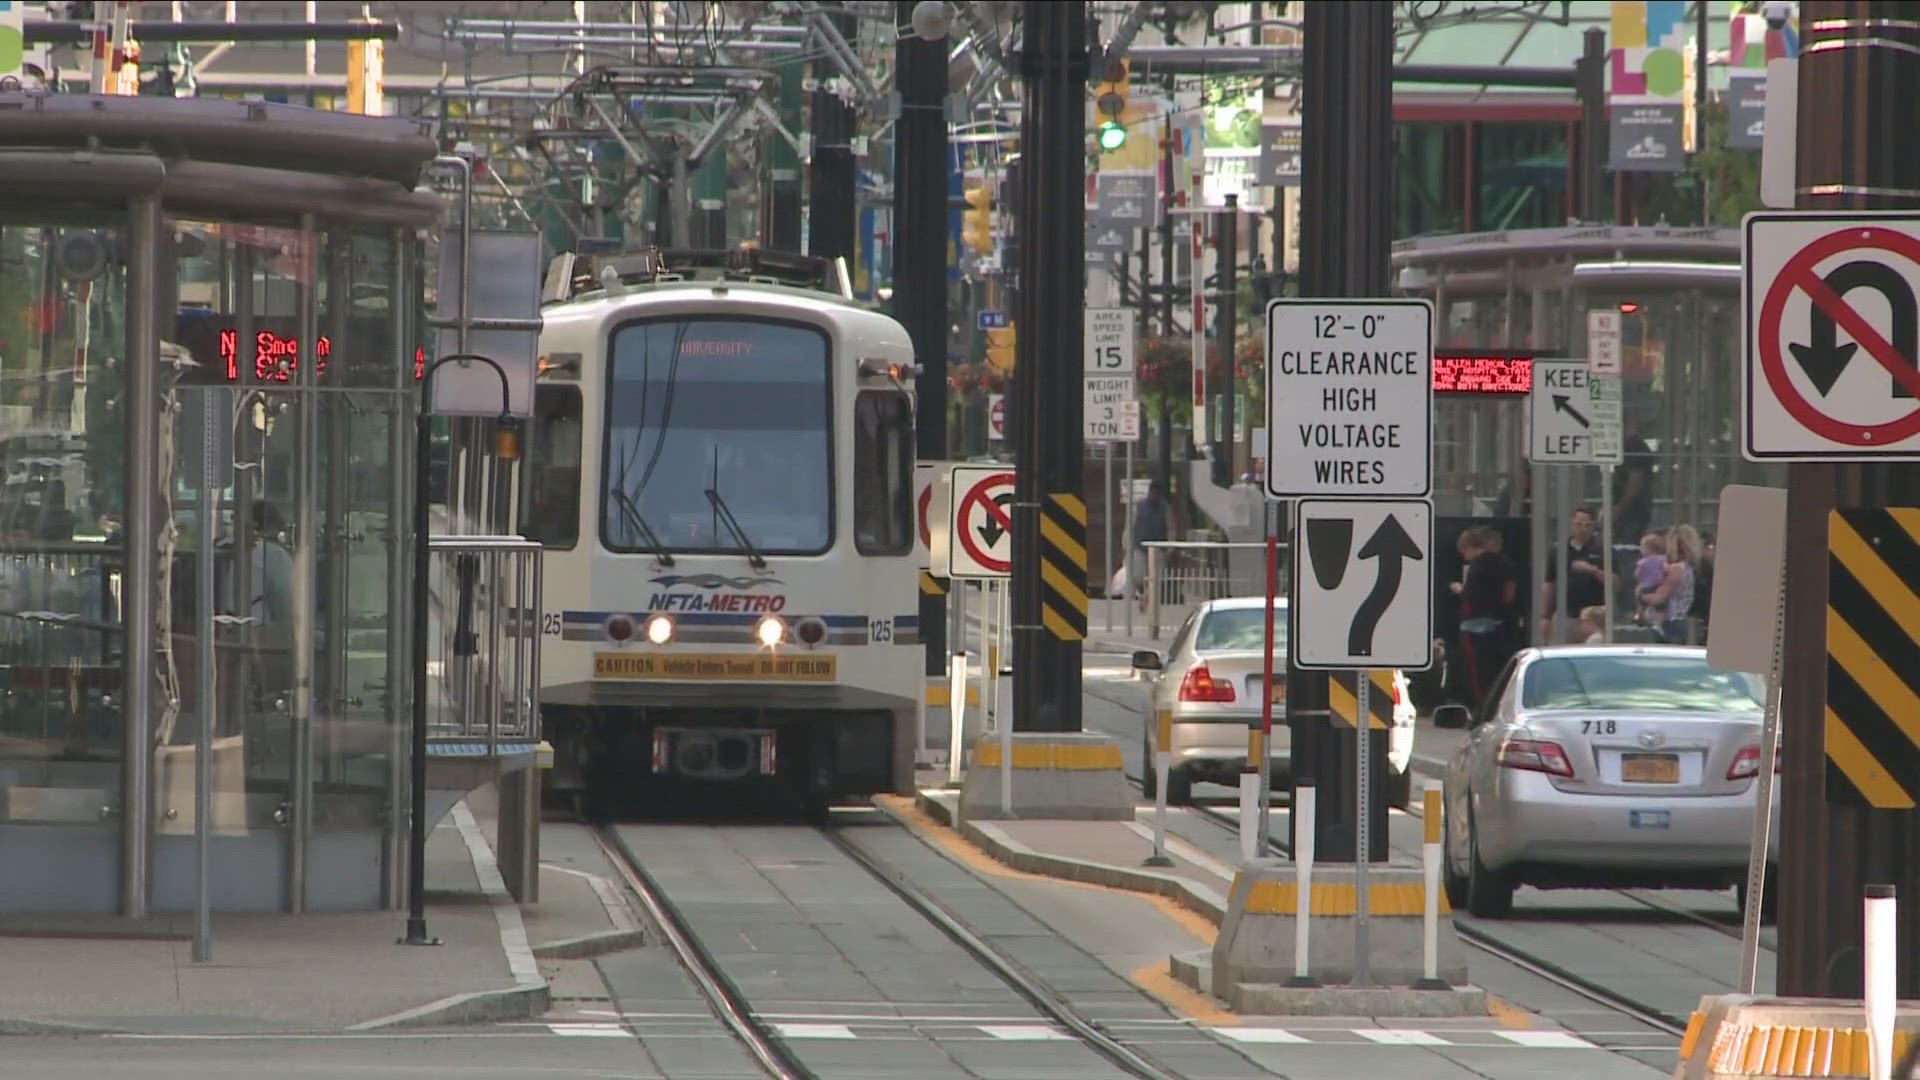 The above ground portion of the Metro Rail will be closed from May 28 to June 2 for repairs and upgrades, according to the NFTA.